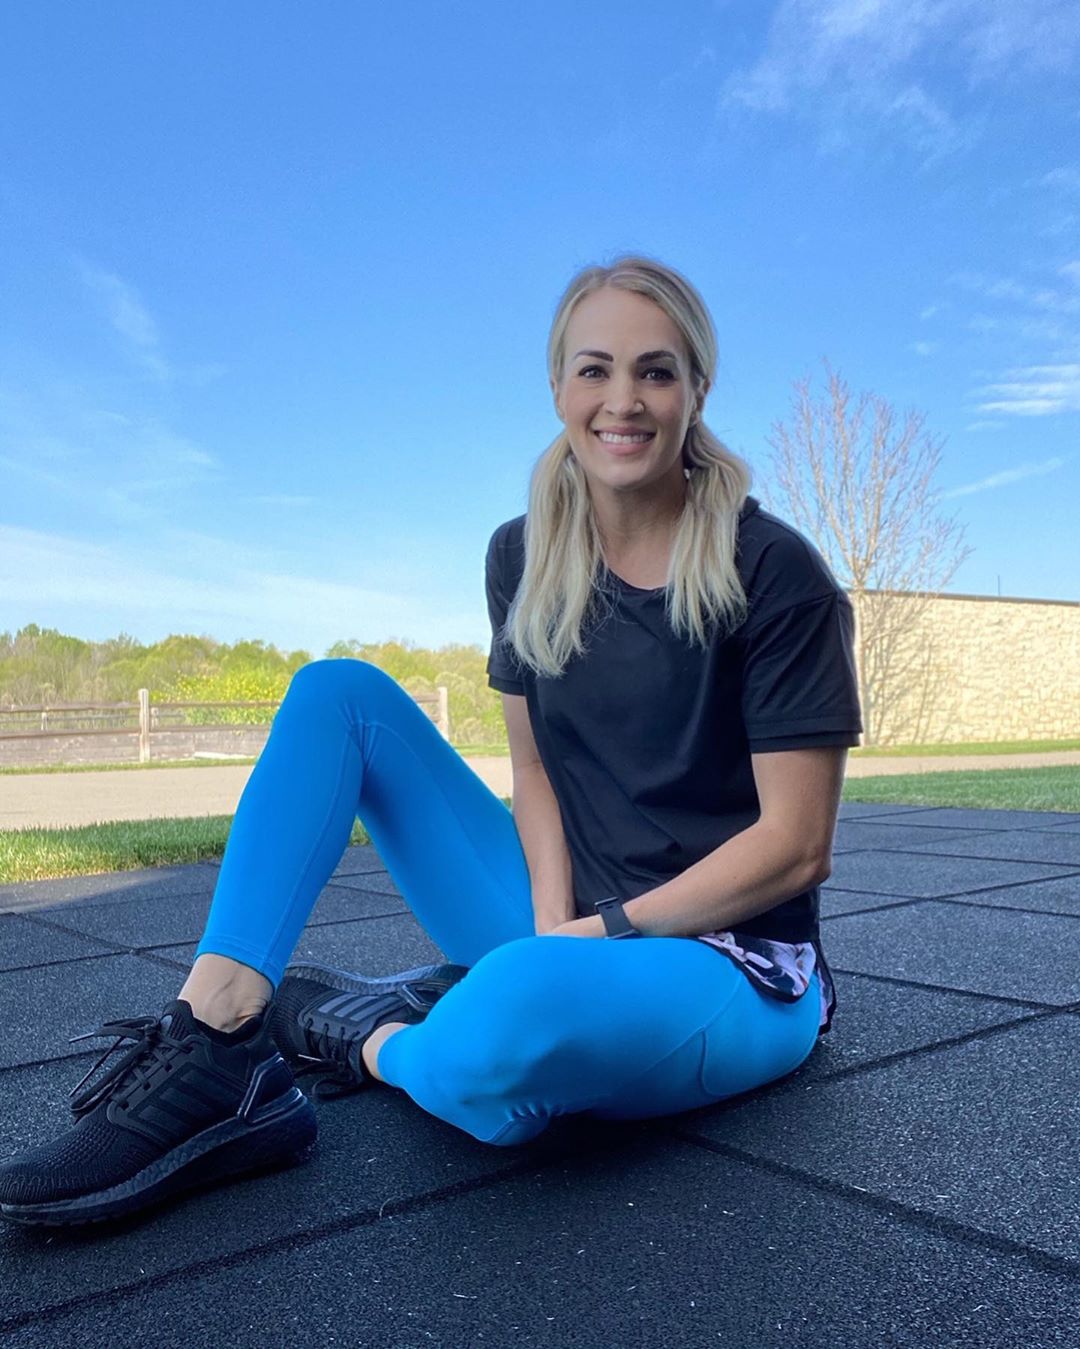 Carrie Underwood Is A Real Person: Wears Leggins & Helps Stray